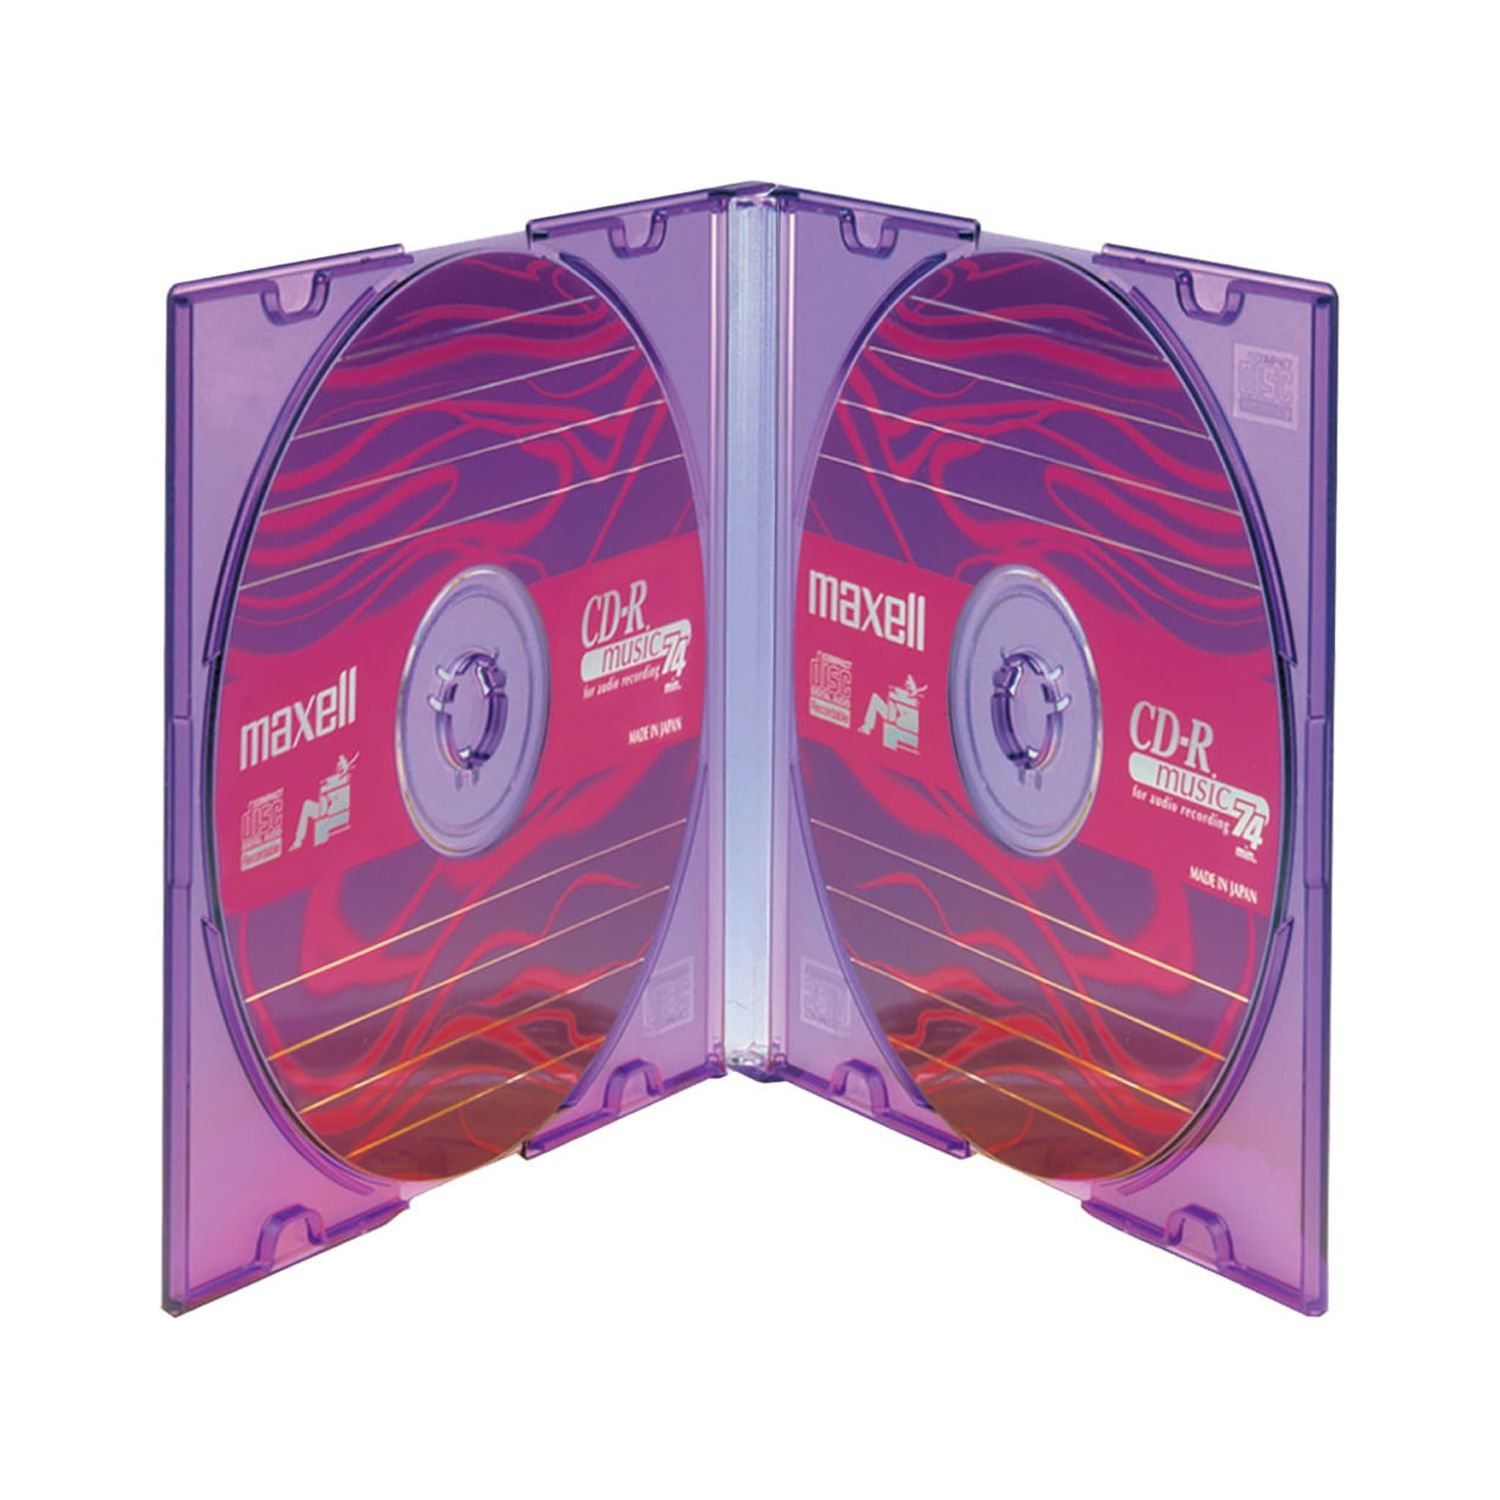 Maxell® Dual-disc Jewel Cases, 25 Pack - image 2 of 4